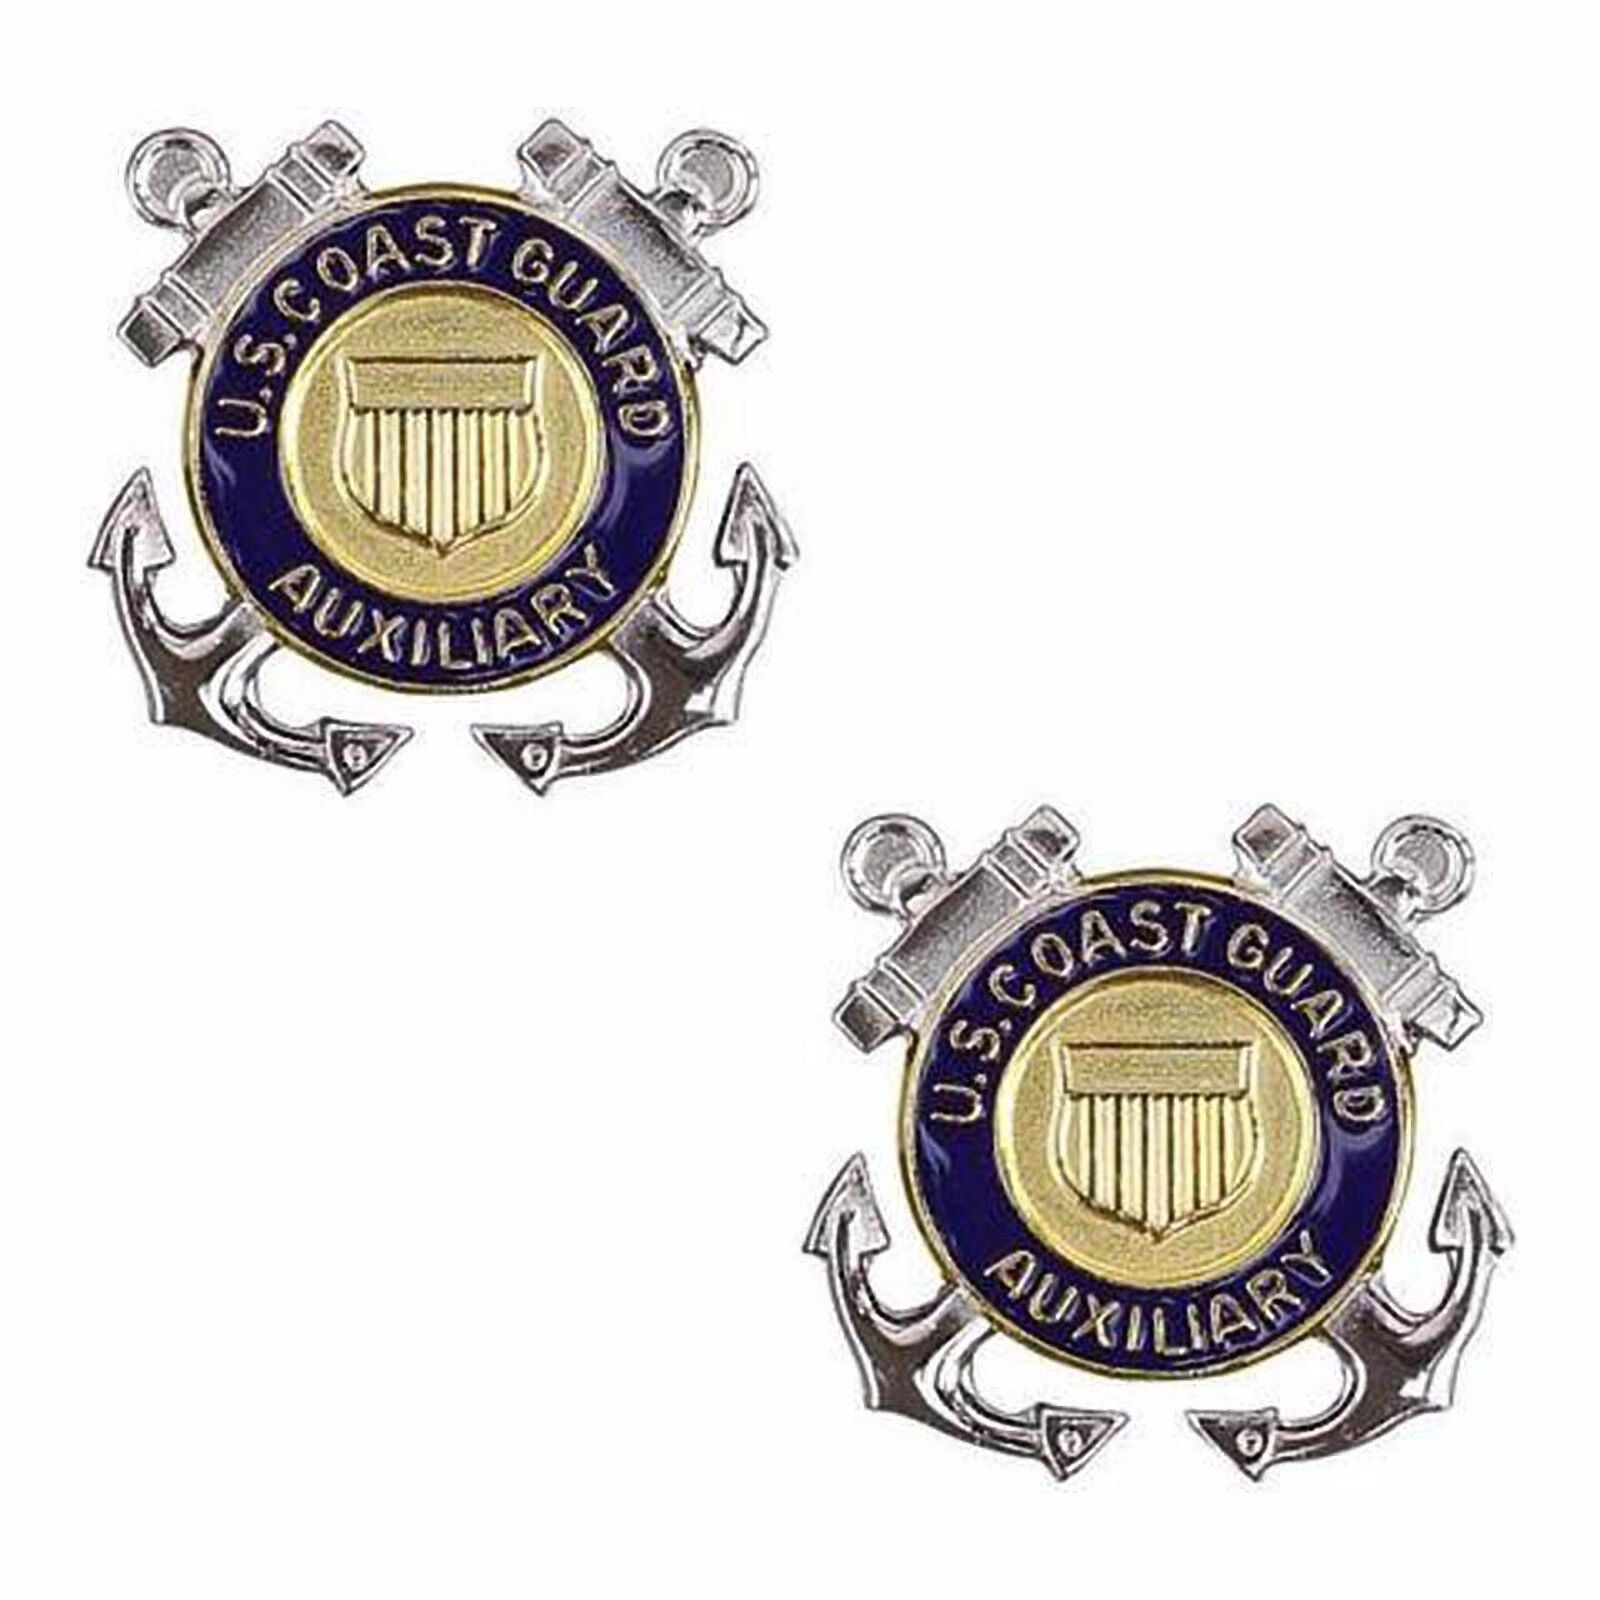 USCG Coast Guard Auxiliary Collar Device Member  1 PAIR NEW  (Made in USA)